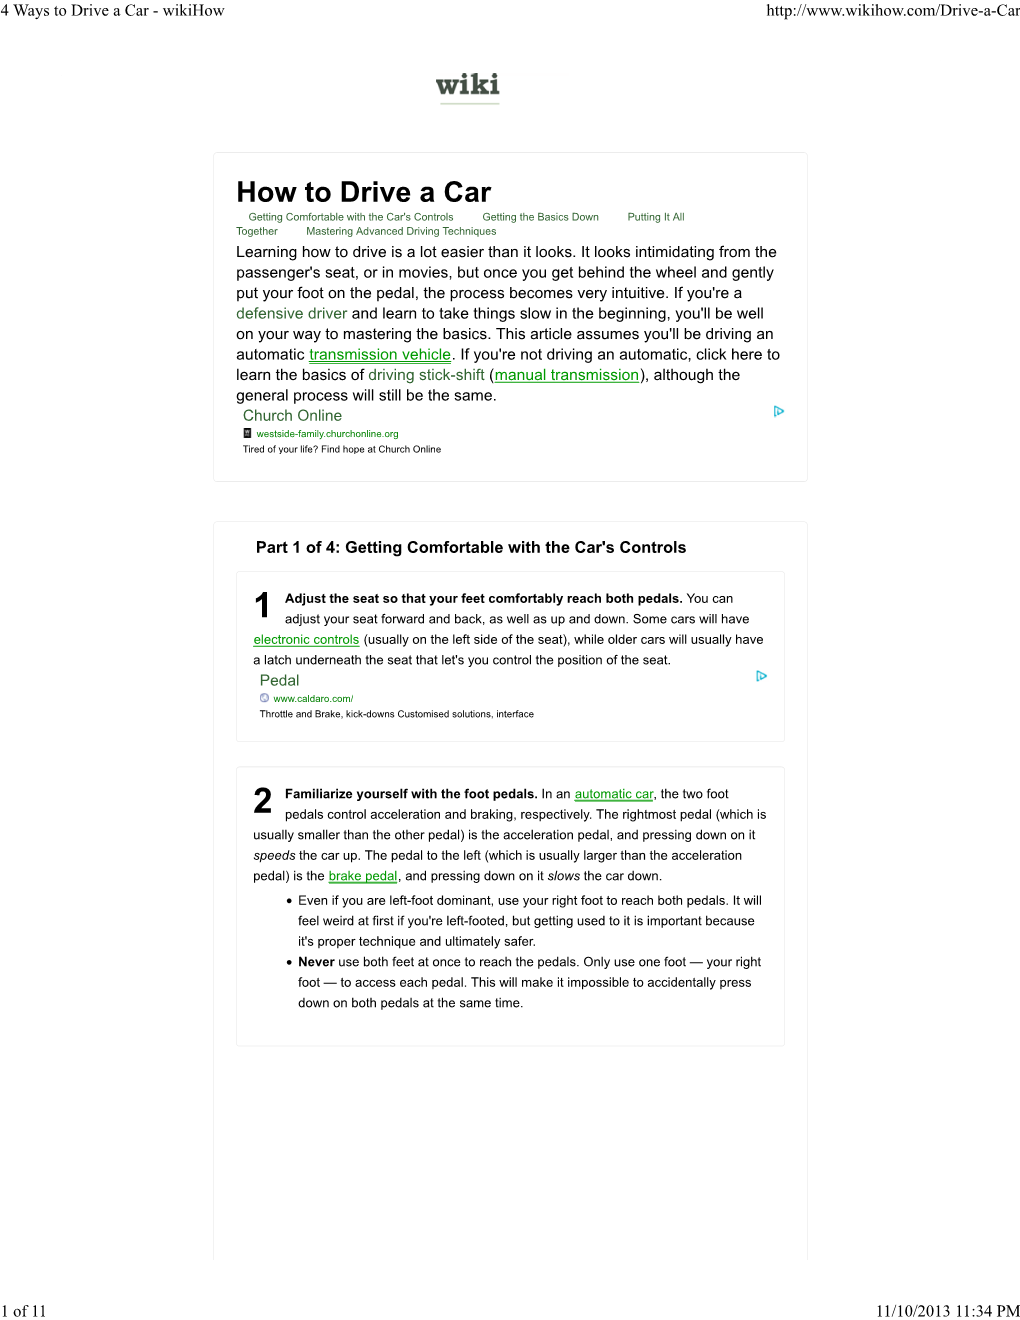 4 Ways to Drive a Car - Wikihow